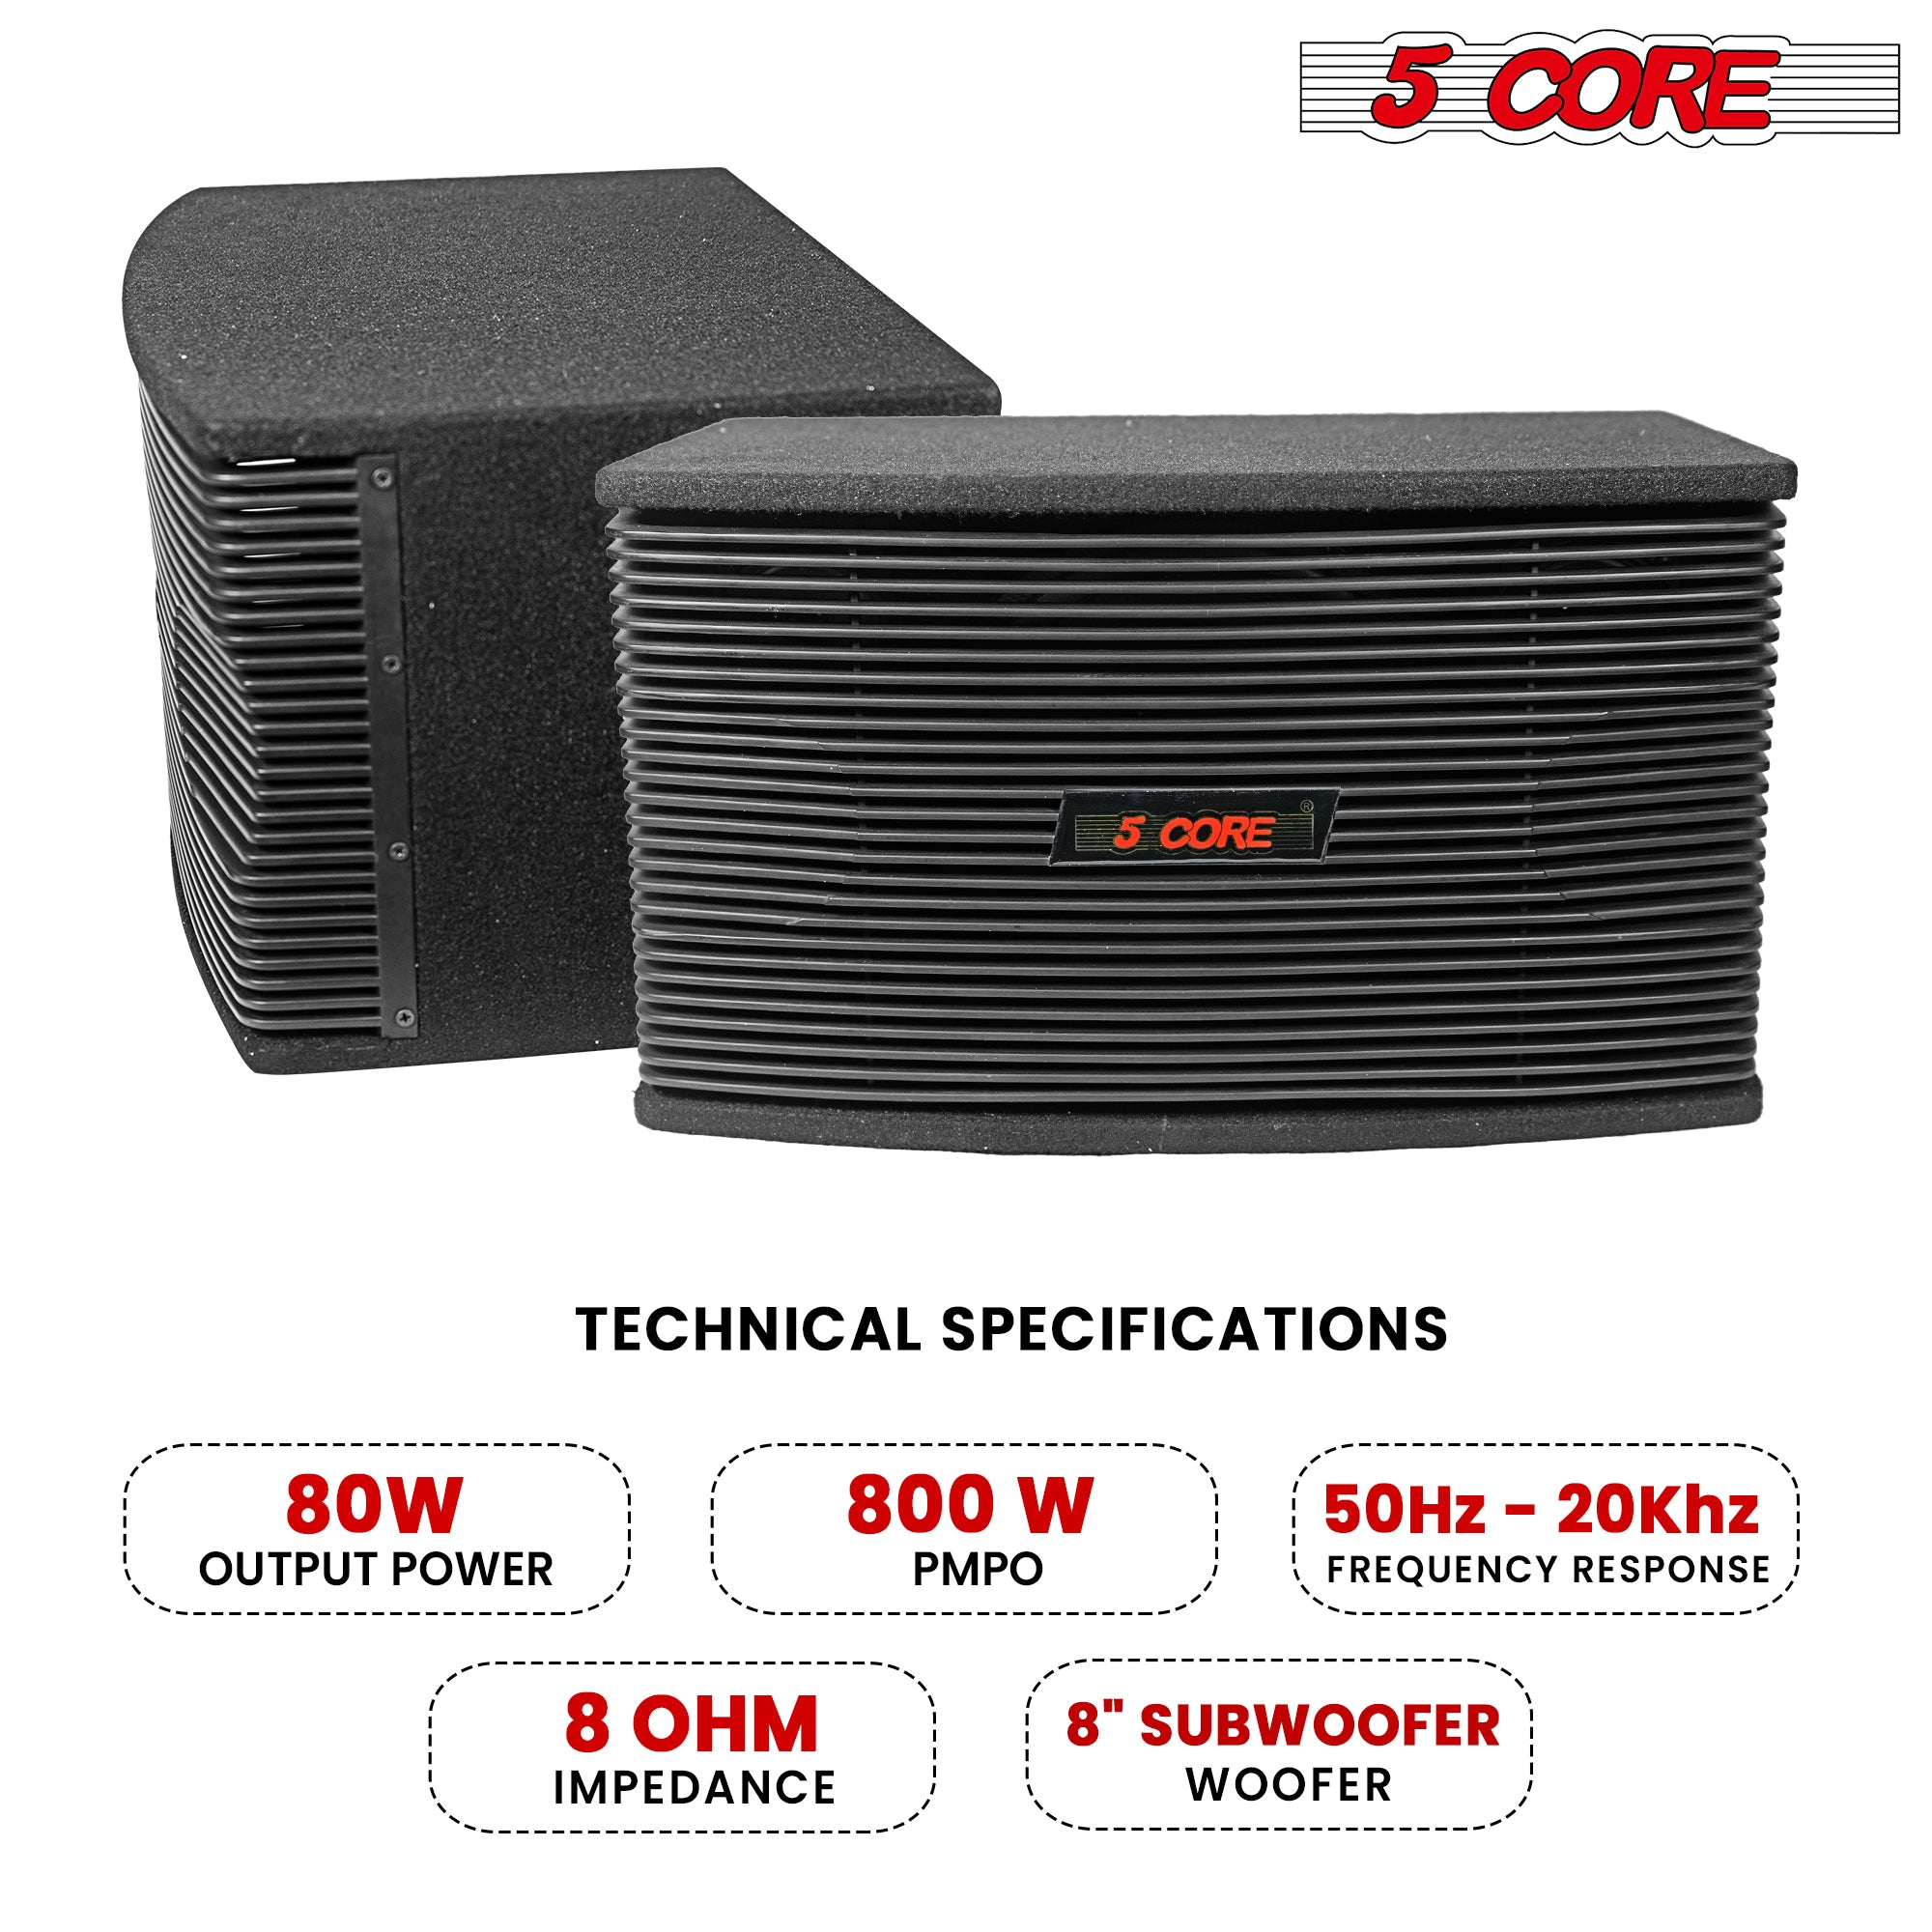 5 Core DJ speakers 8" PA Speaker System 80W RMS PA System Tough ABS Cabinet Speakon Connection 8 Ohm Portable Sound System w Subwoofer -Ventilo 890